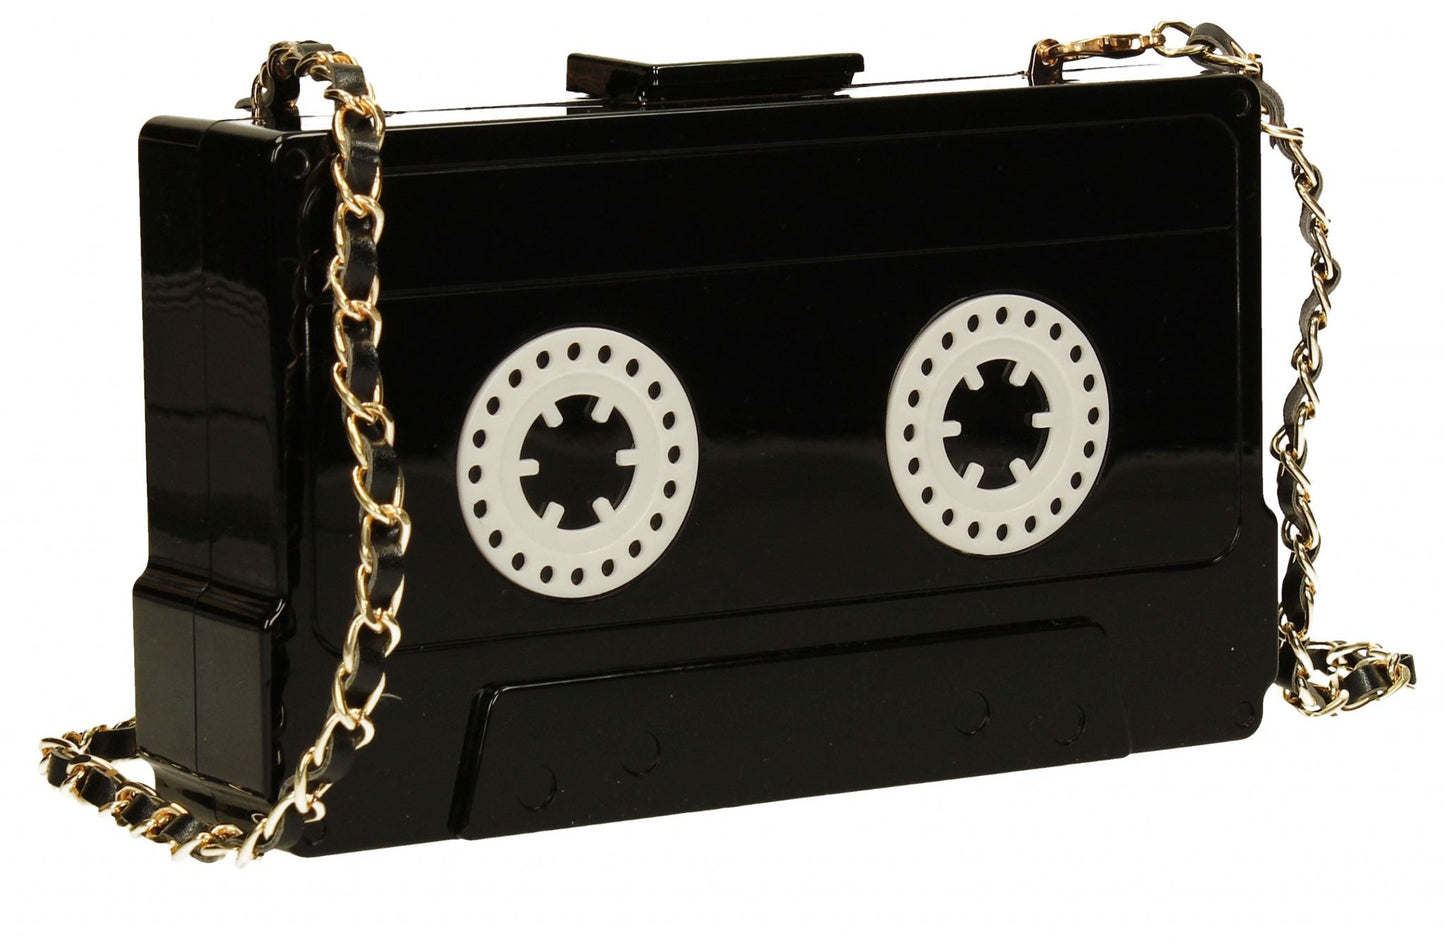 SWANKYSWANS Rita Quirky Cassette style Box Clutch Black Cute Cheap Clutch Bag For Weddings School and Work